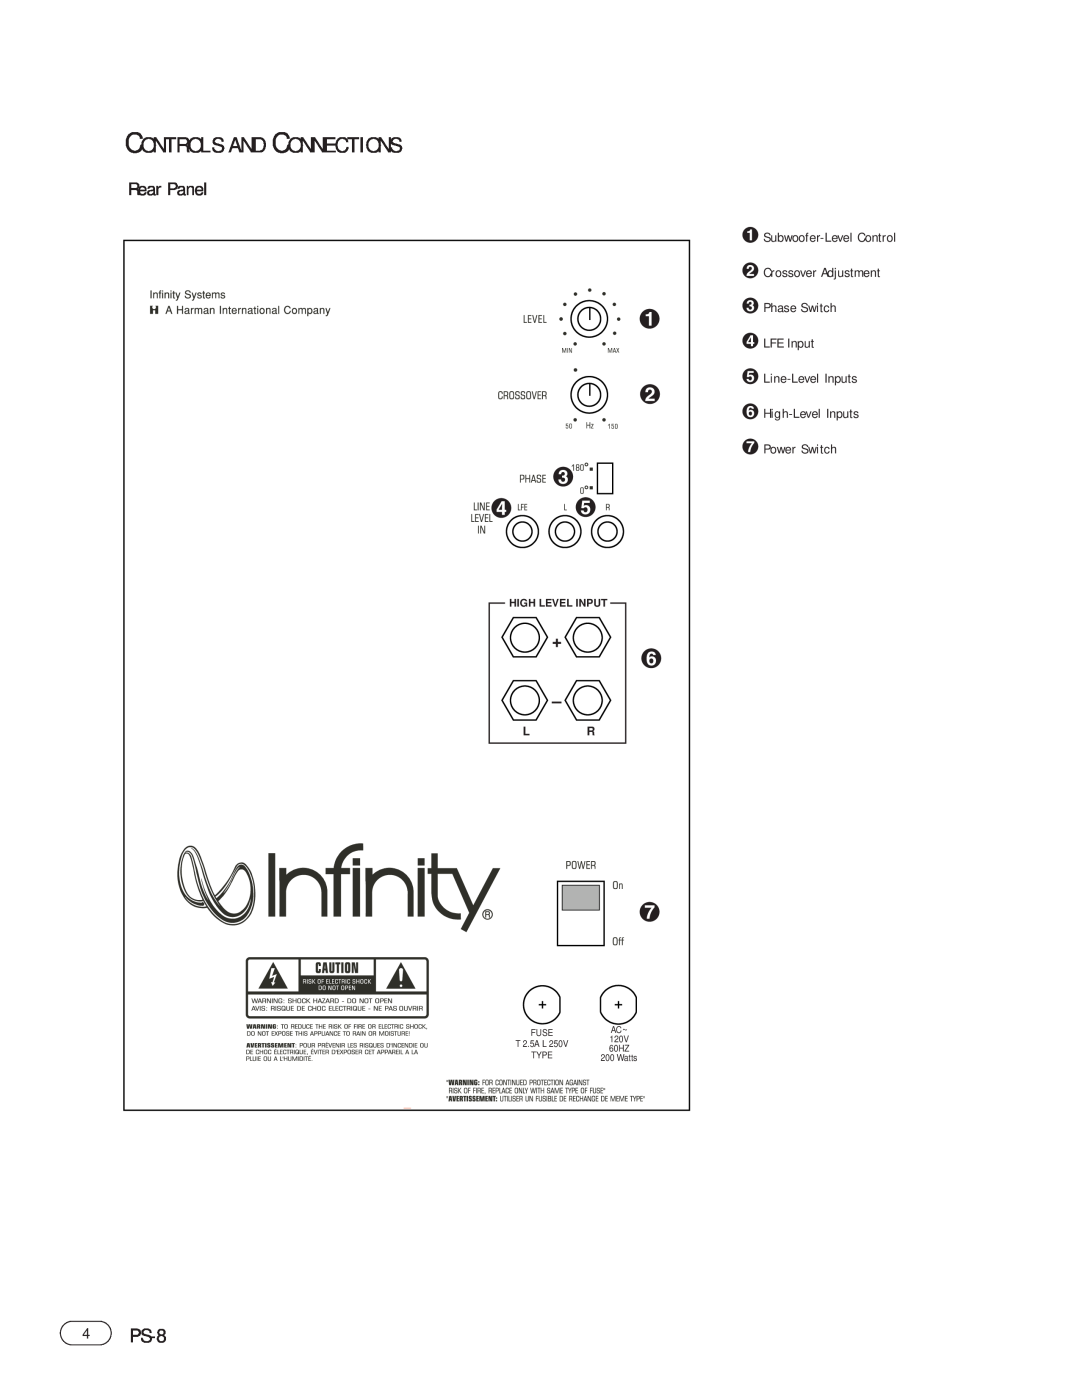 Infinity Controls And Connections, 4PS-8, Rear Panel, £¢ ∞, ¡Subwoofer-LevelControl Crossover Adjustment, Fuse, 120V 